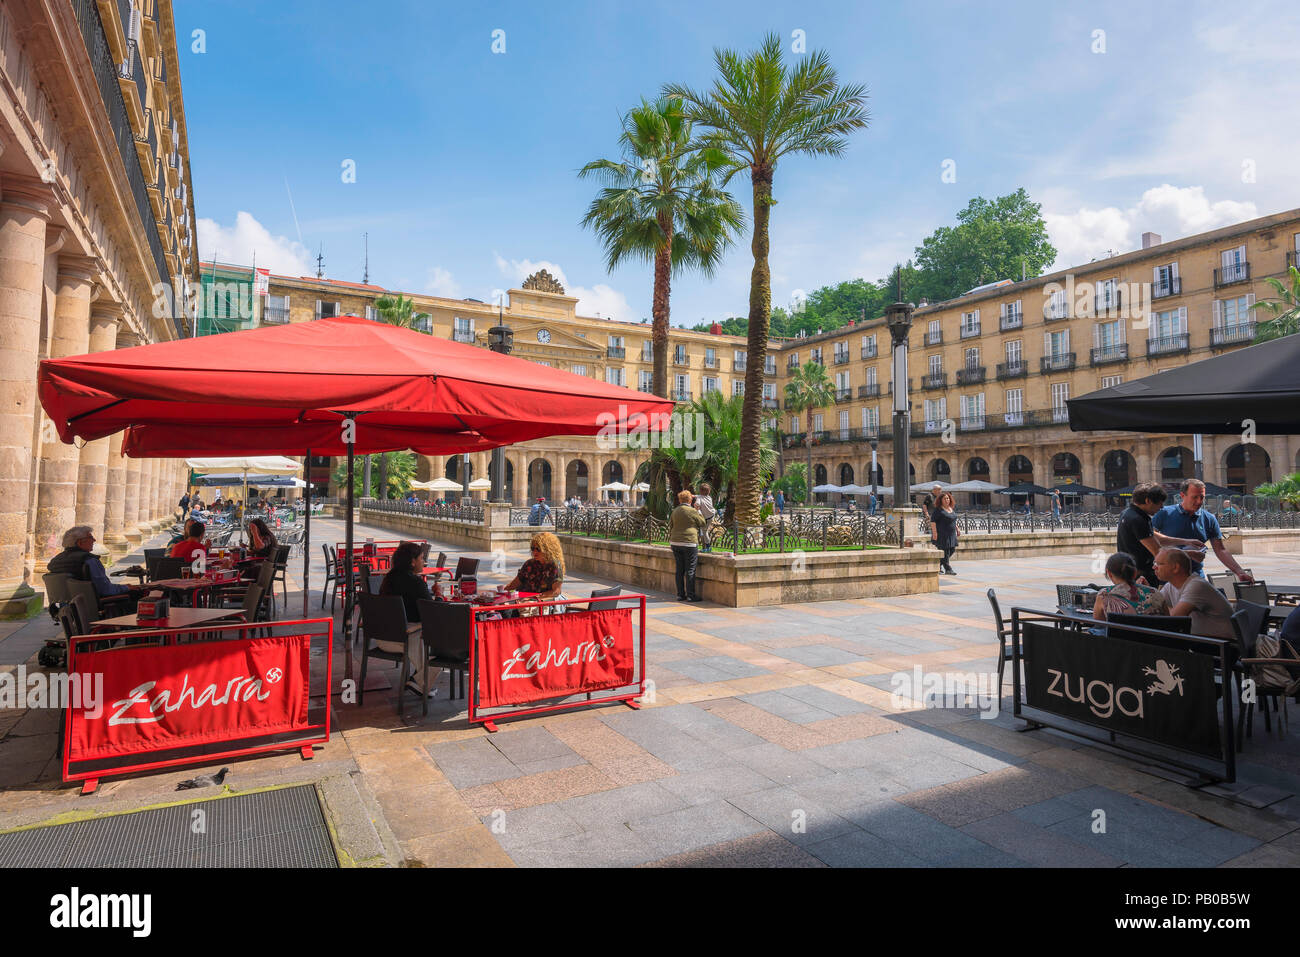 Bilbao Plaza Nueva, view of people seated at cafe terraces in the Plaza Nueva in the Old Town (Casco Vieja) area of Bilbao, Spain. Stock Photo